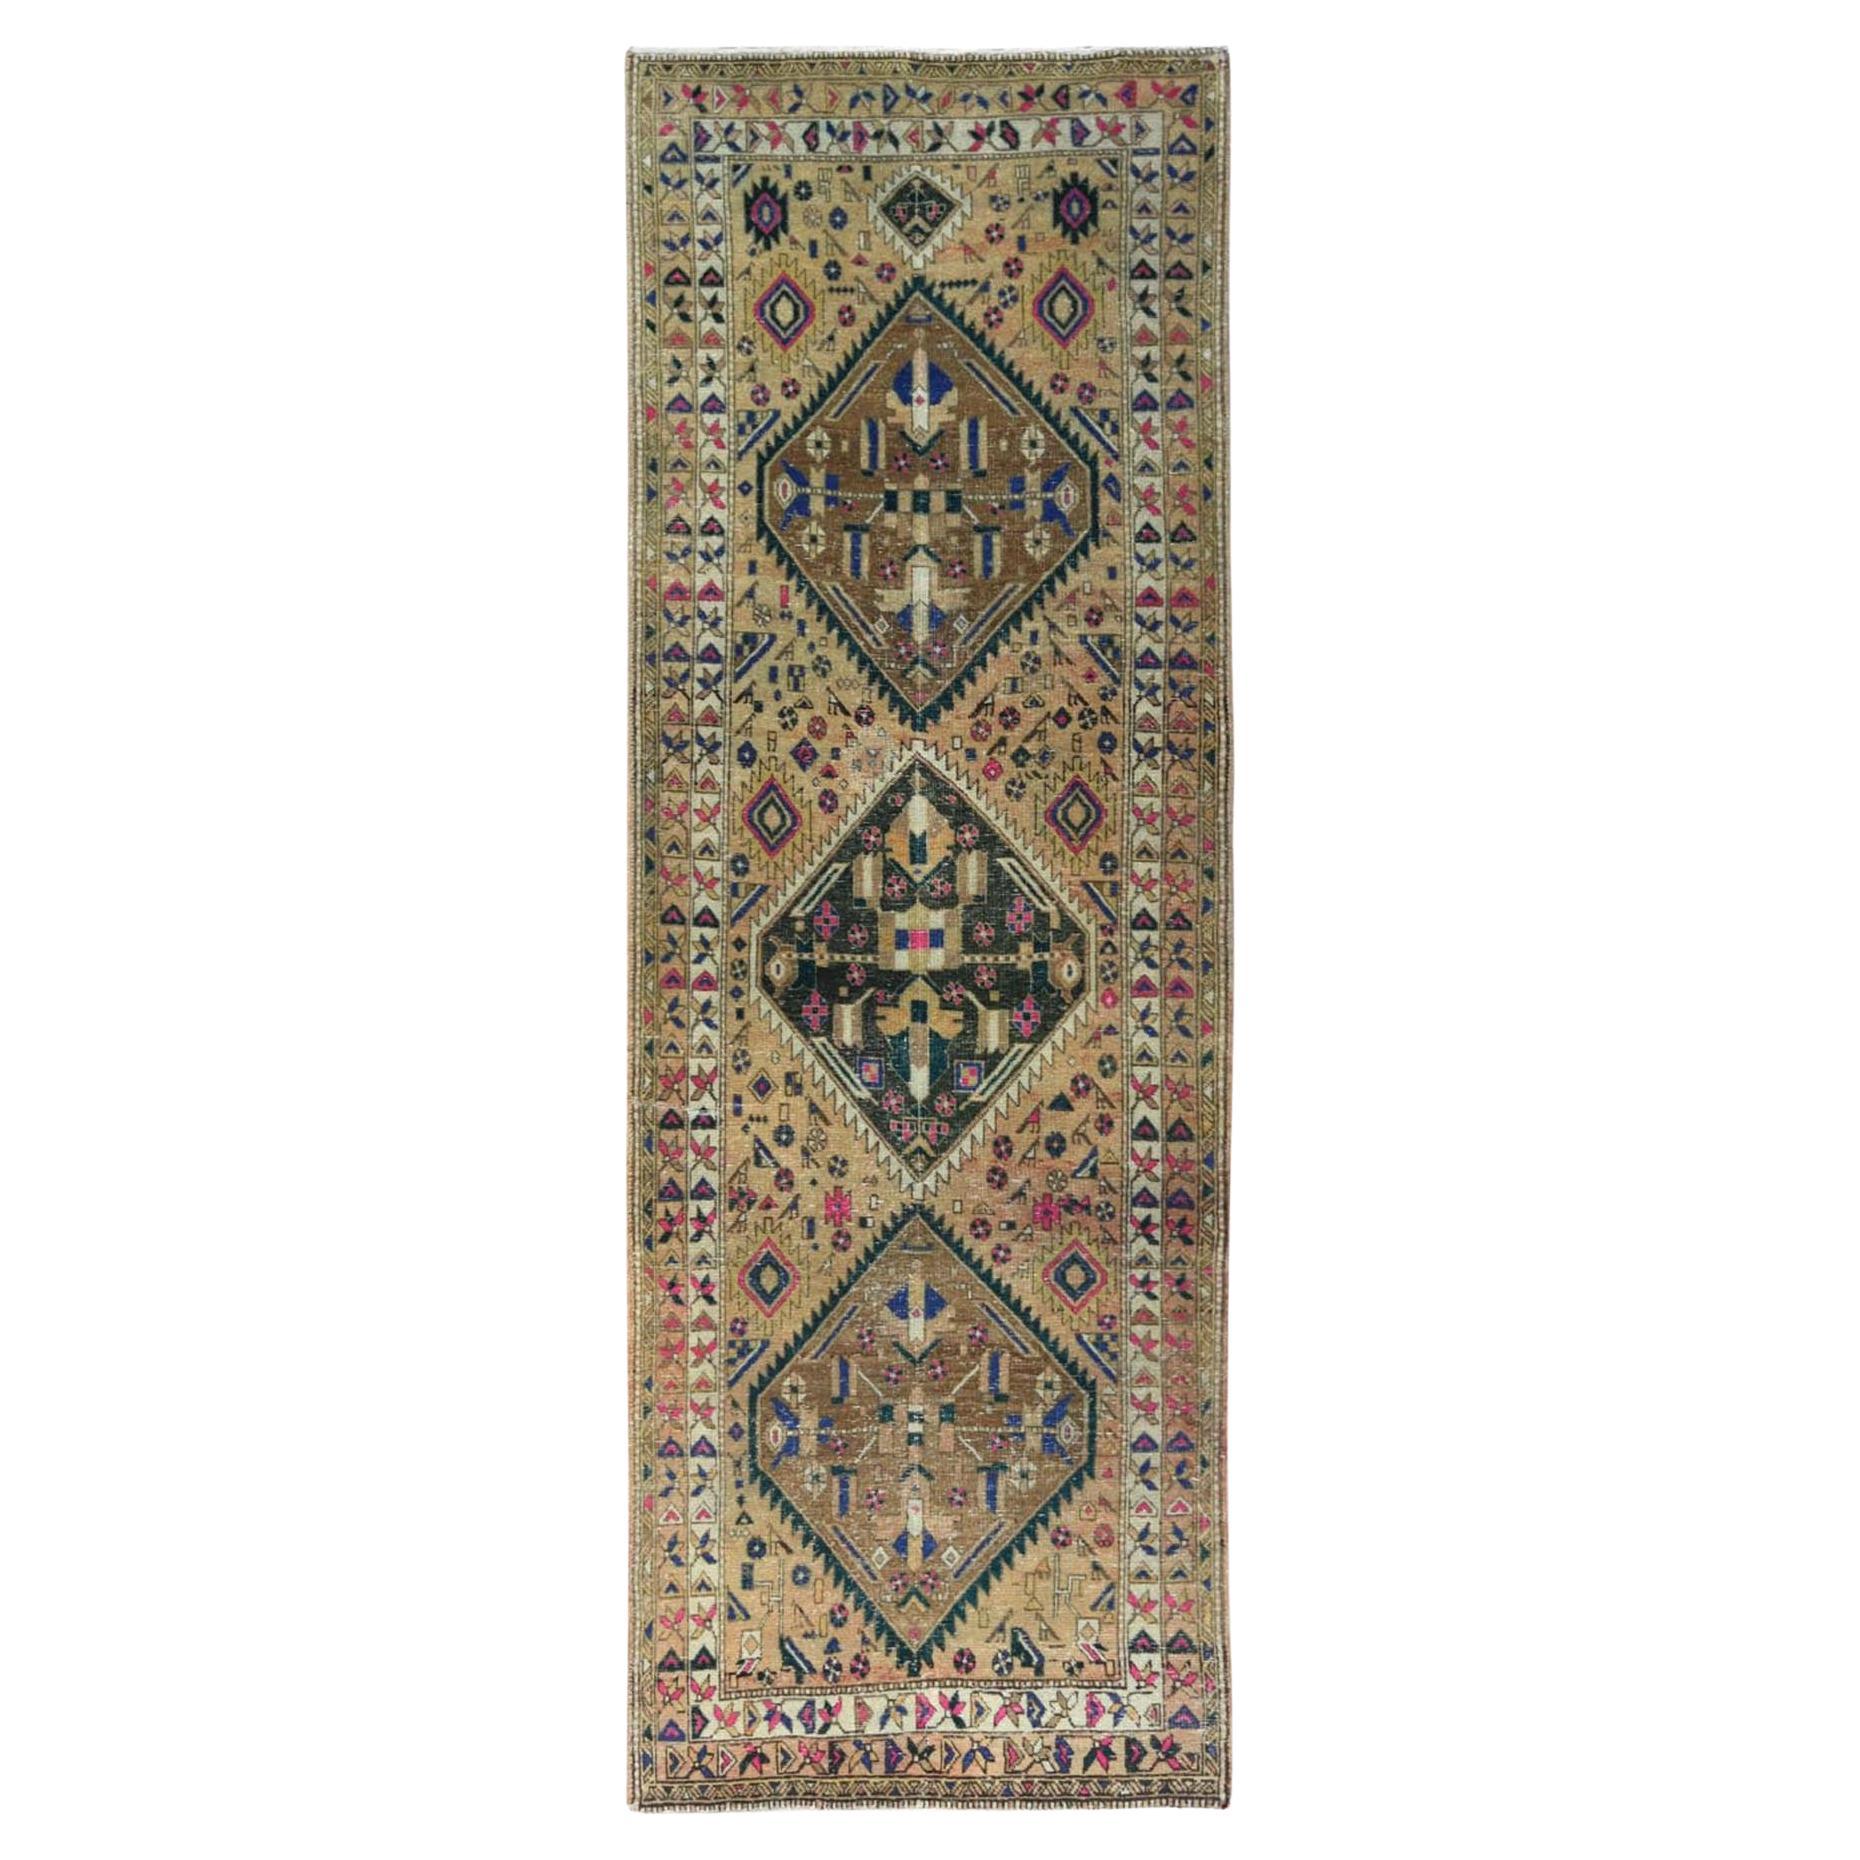 Beige Old Persian Serab Rustic Look Worn Wool Hand Knotted Runner Rug 3'9"x11' For Sale